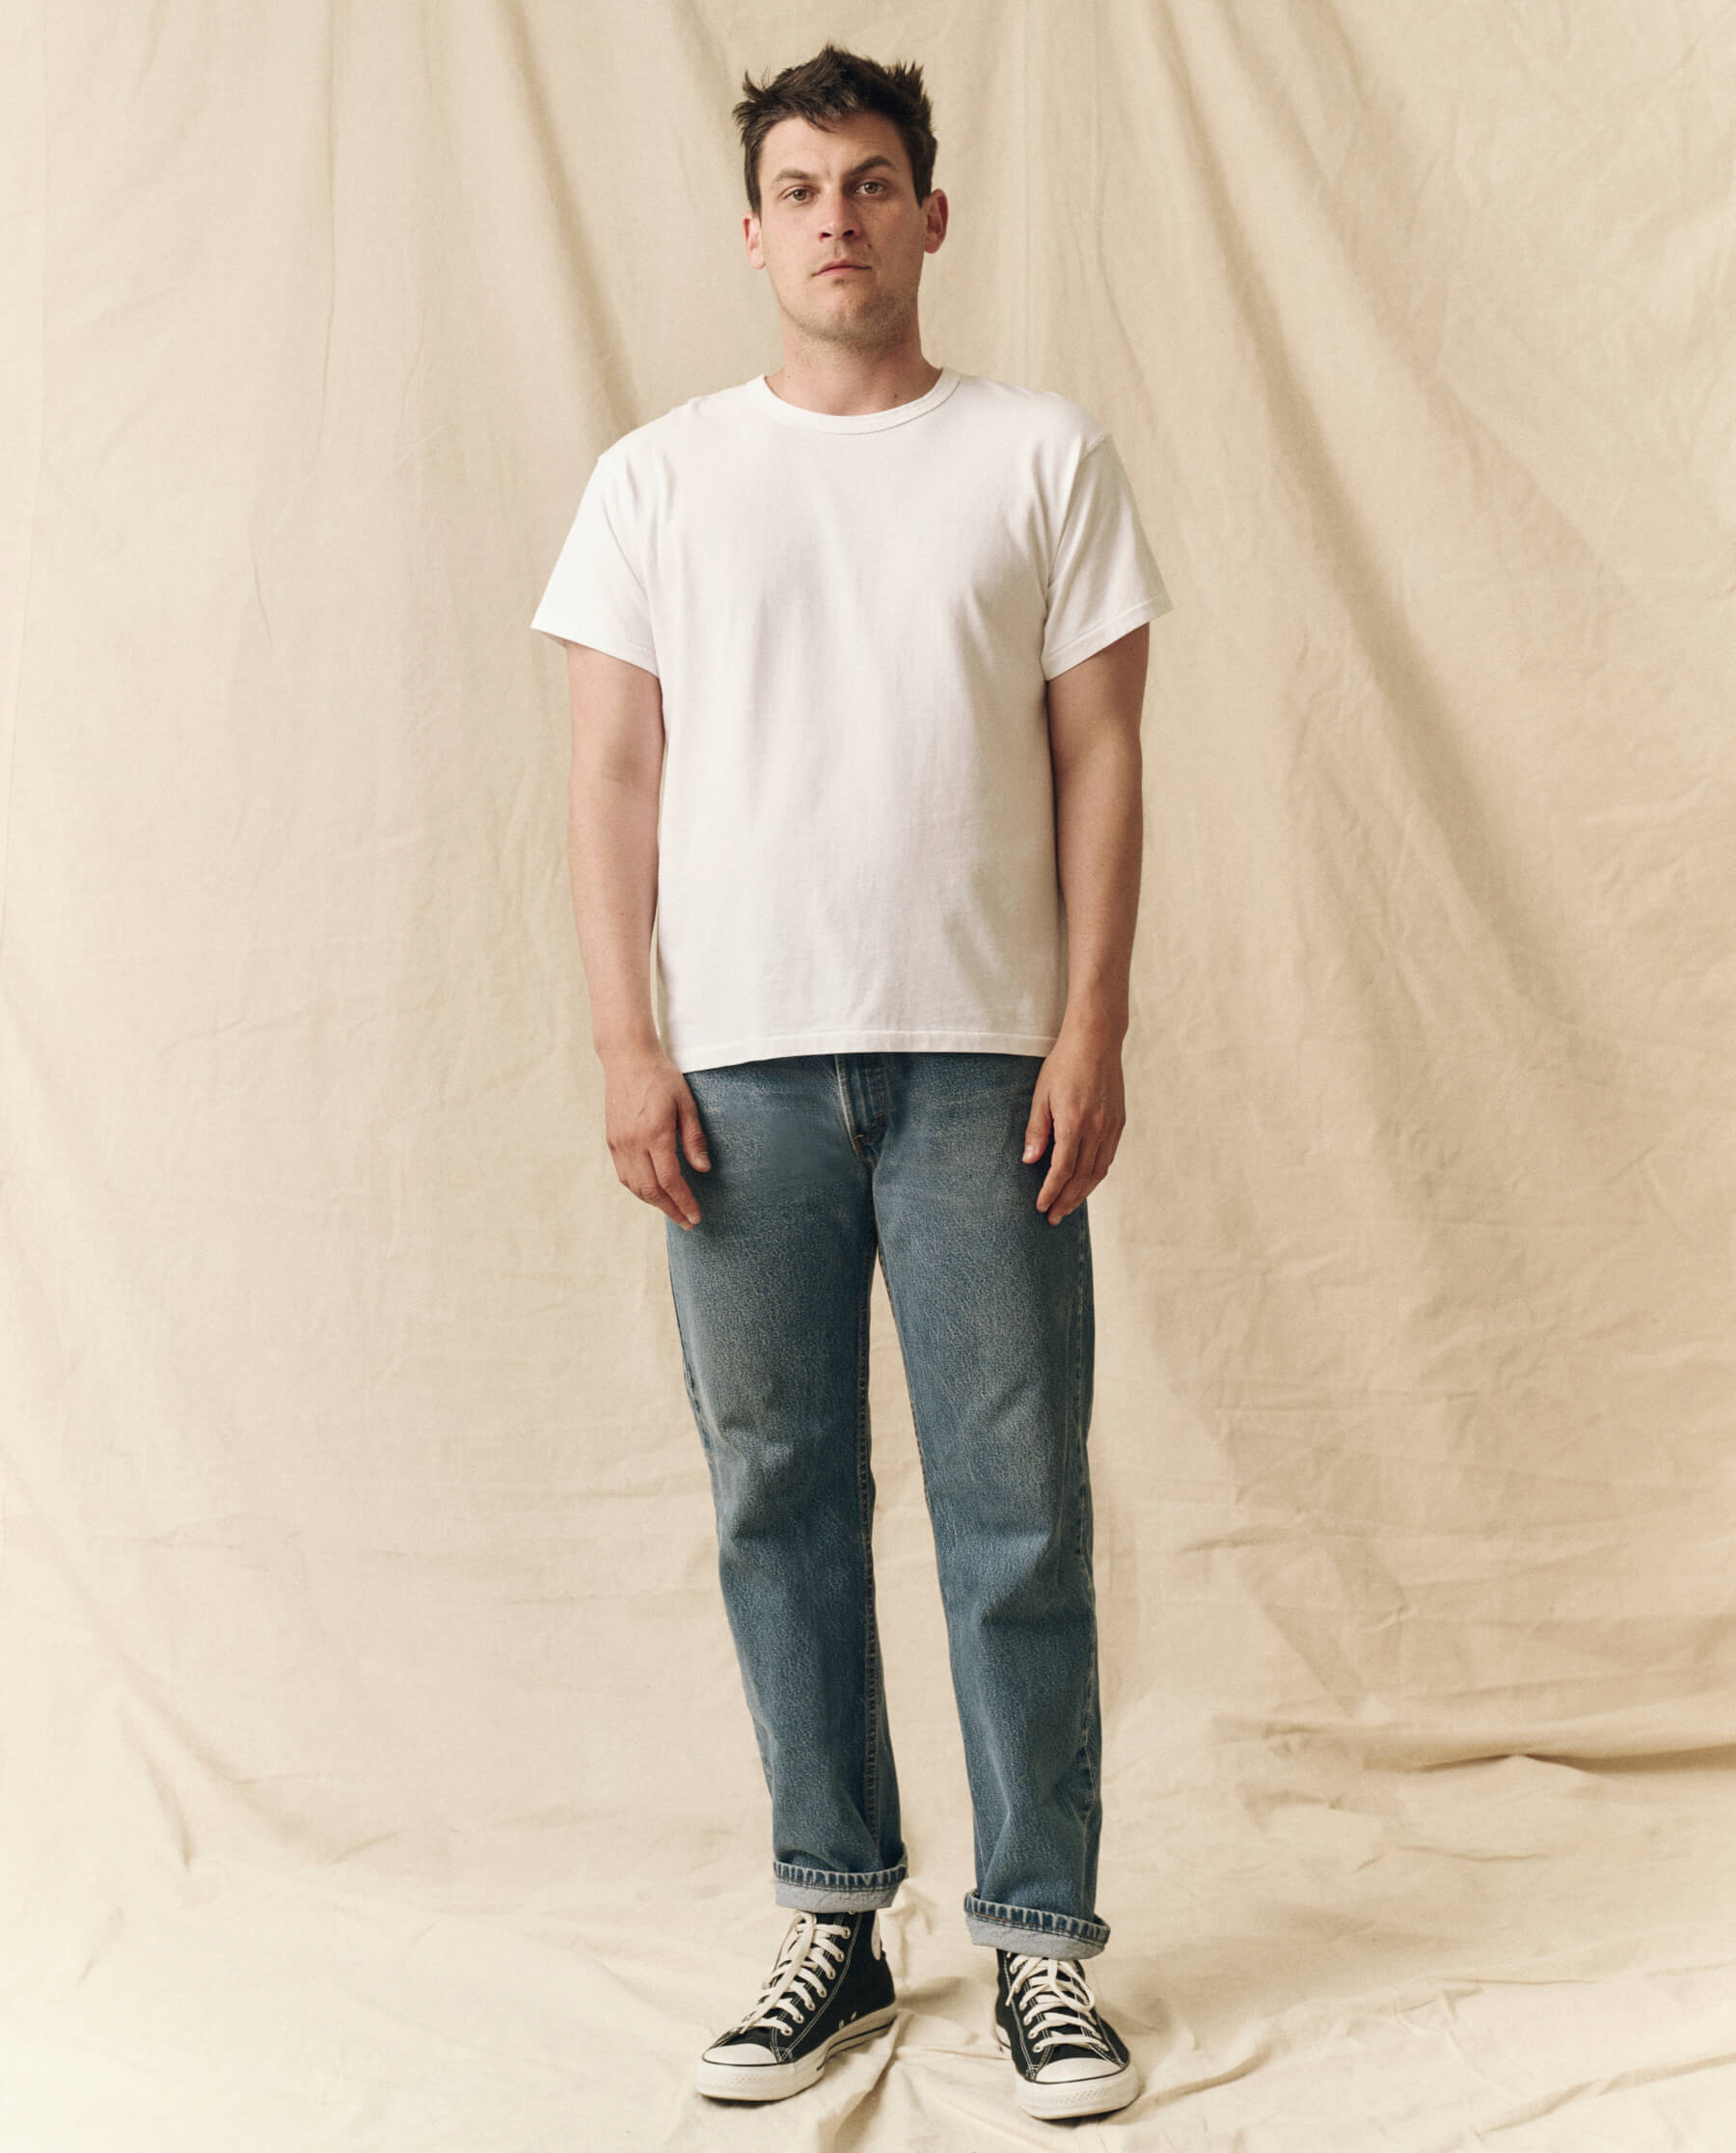 The Men's Pure Knits Boxy Crew. Solid -- True White TEES THE GREAT. FALL 23 MEN